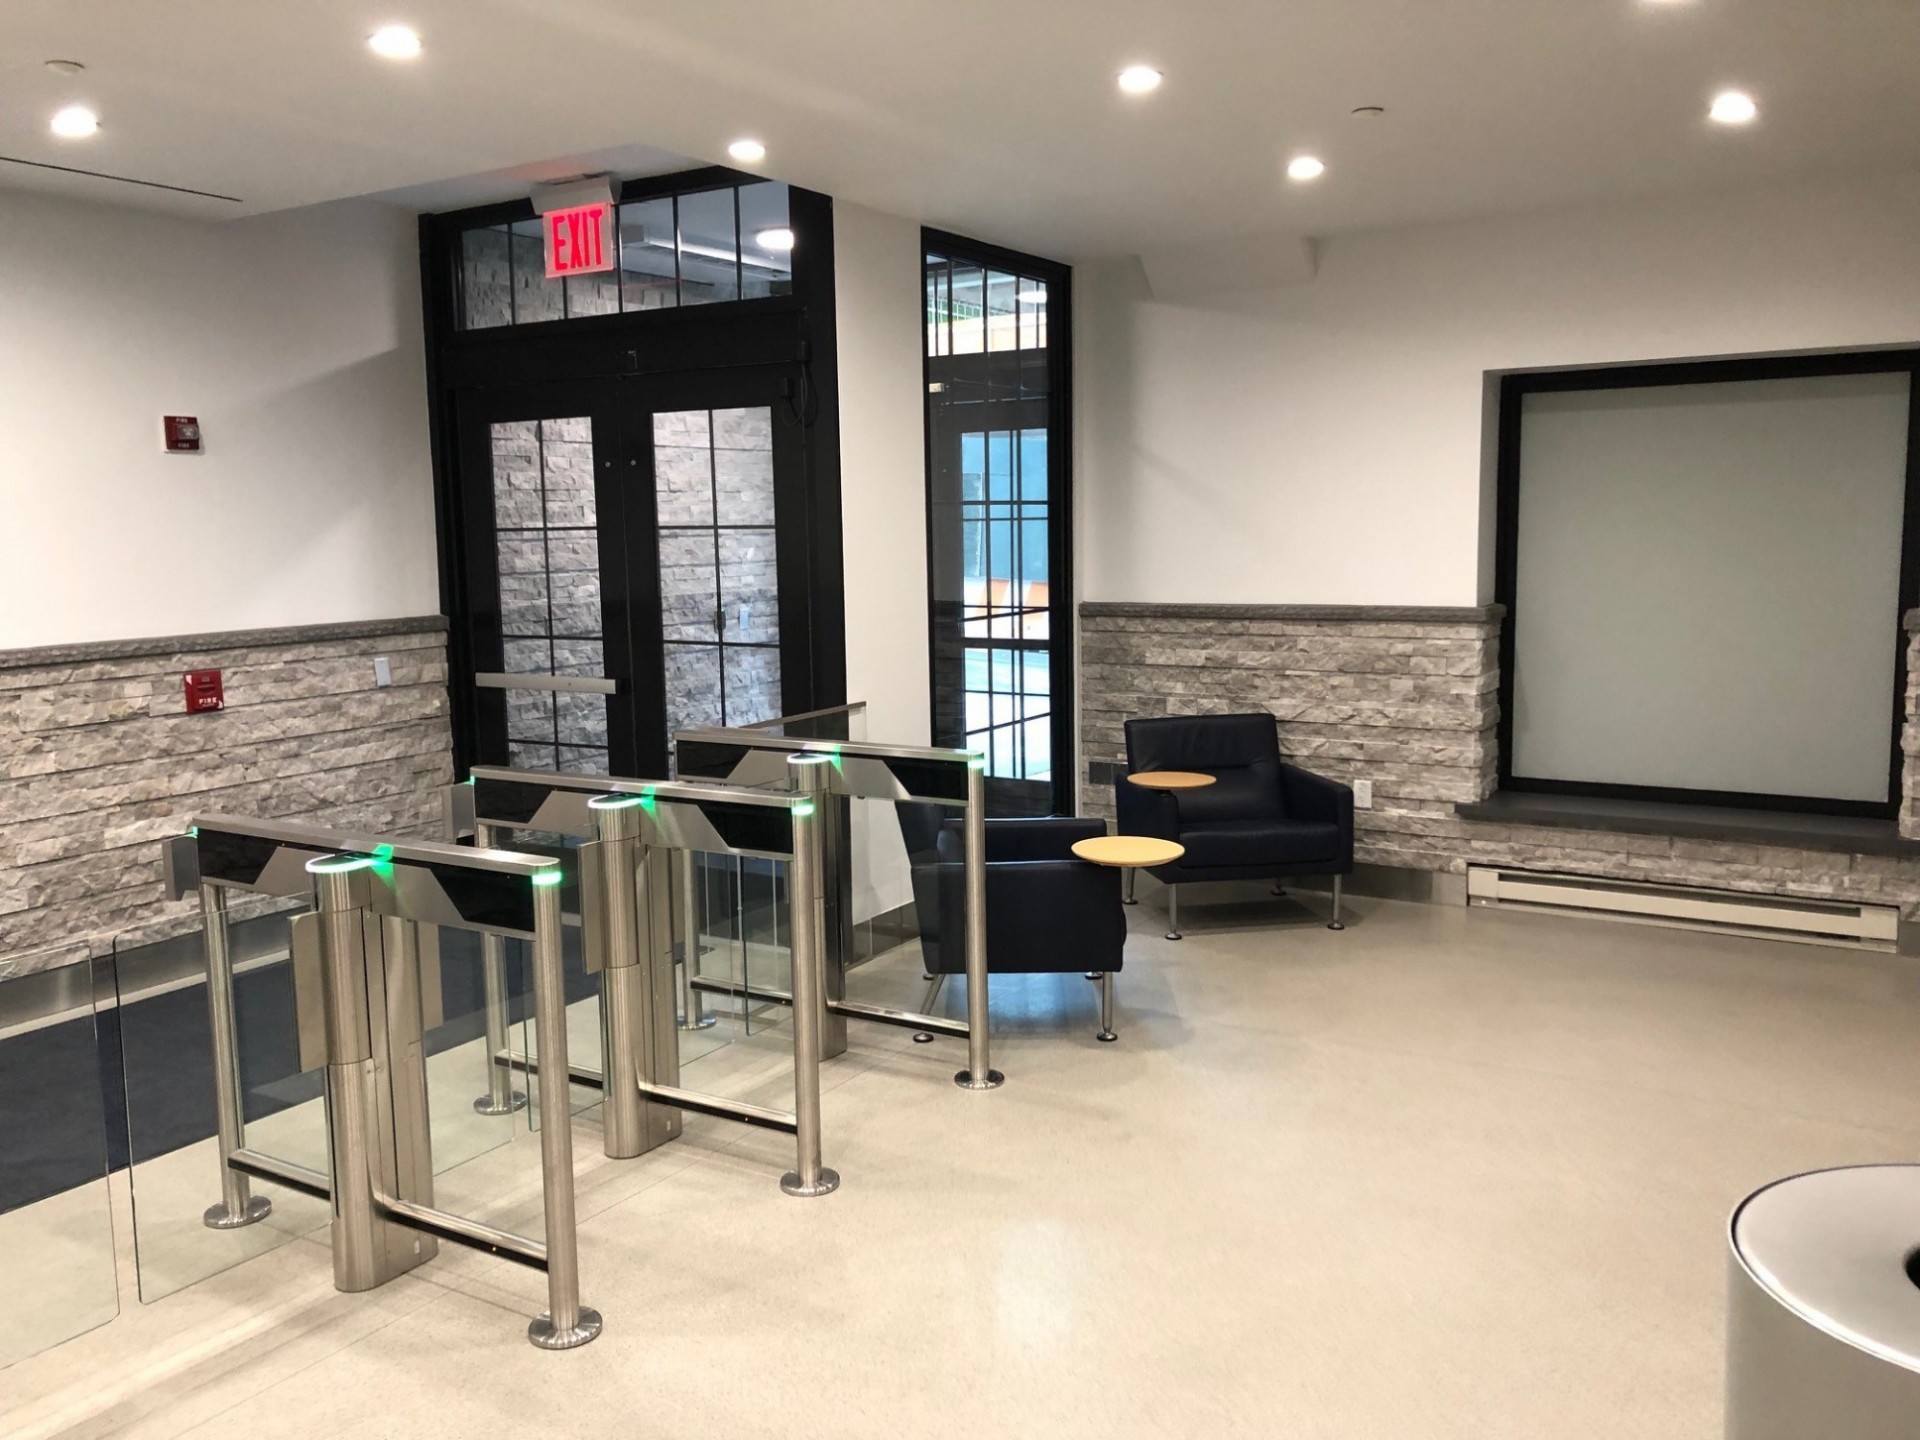 Turnstiles were installed at the lobby entrance, similar to what is in place at other Columbia buildings in Manhattanville.